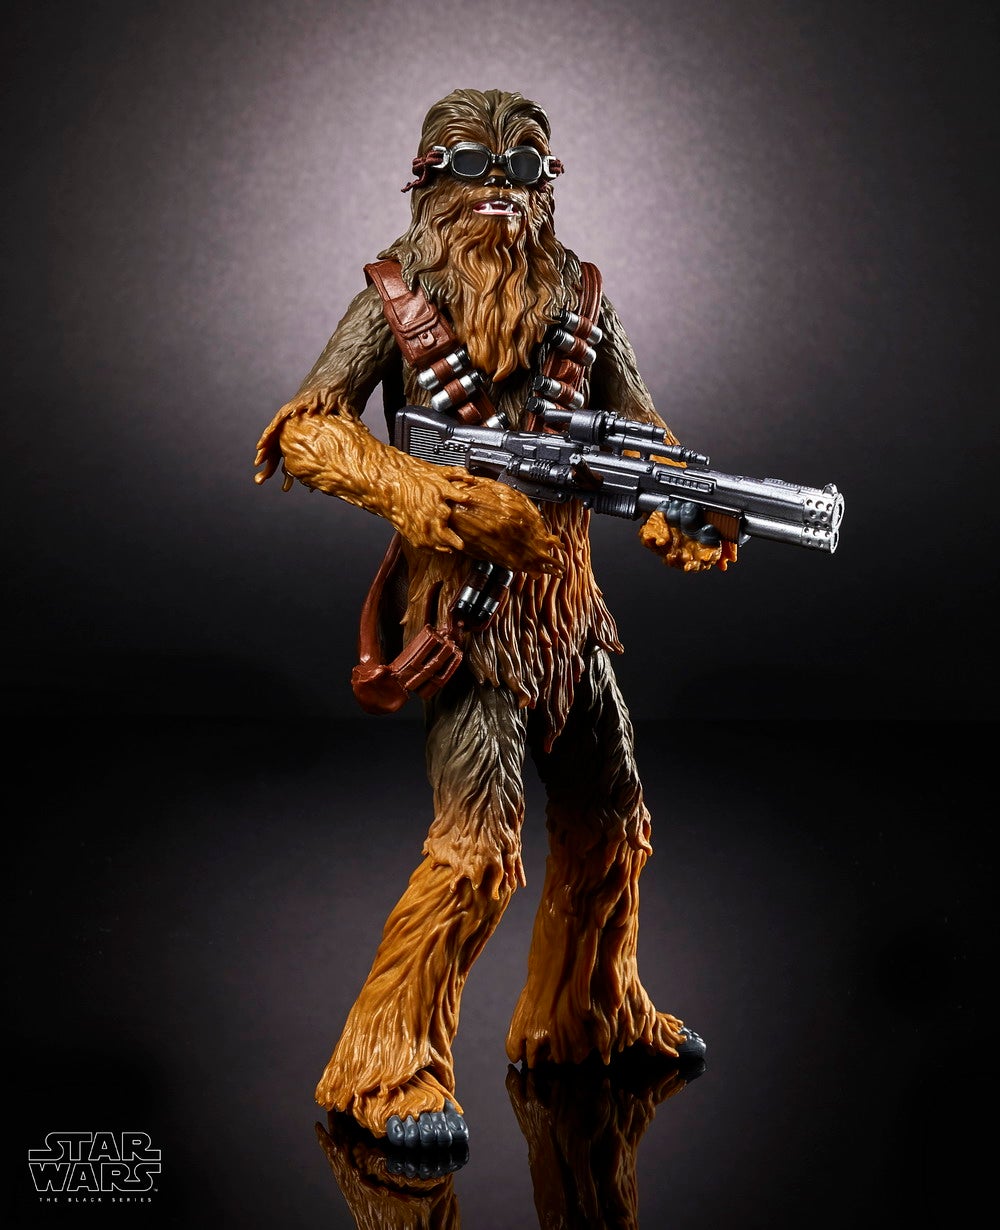 STAR WARS THE BLACK SERIES 6-INCH CHEWBACCA Figure (Target Exclusive)